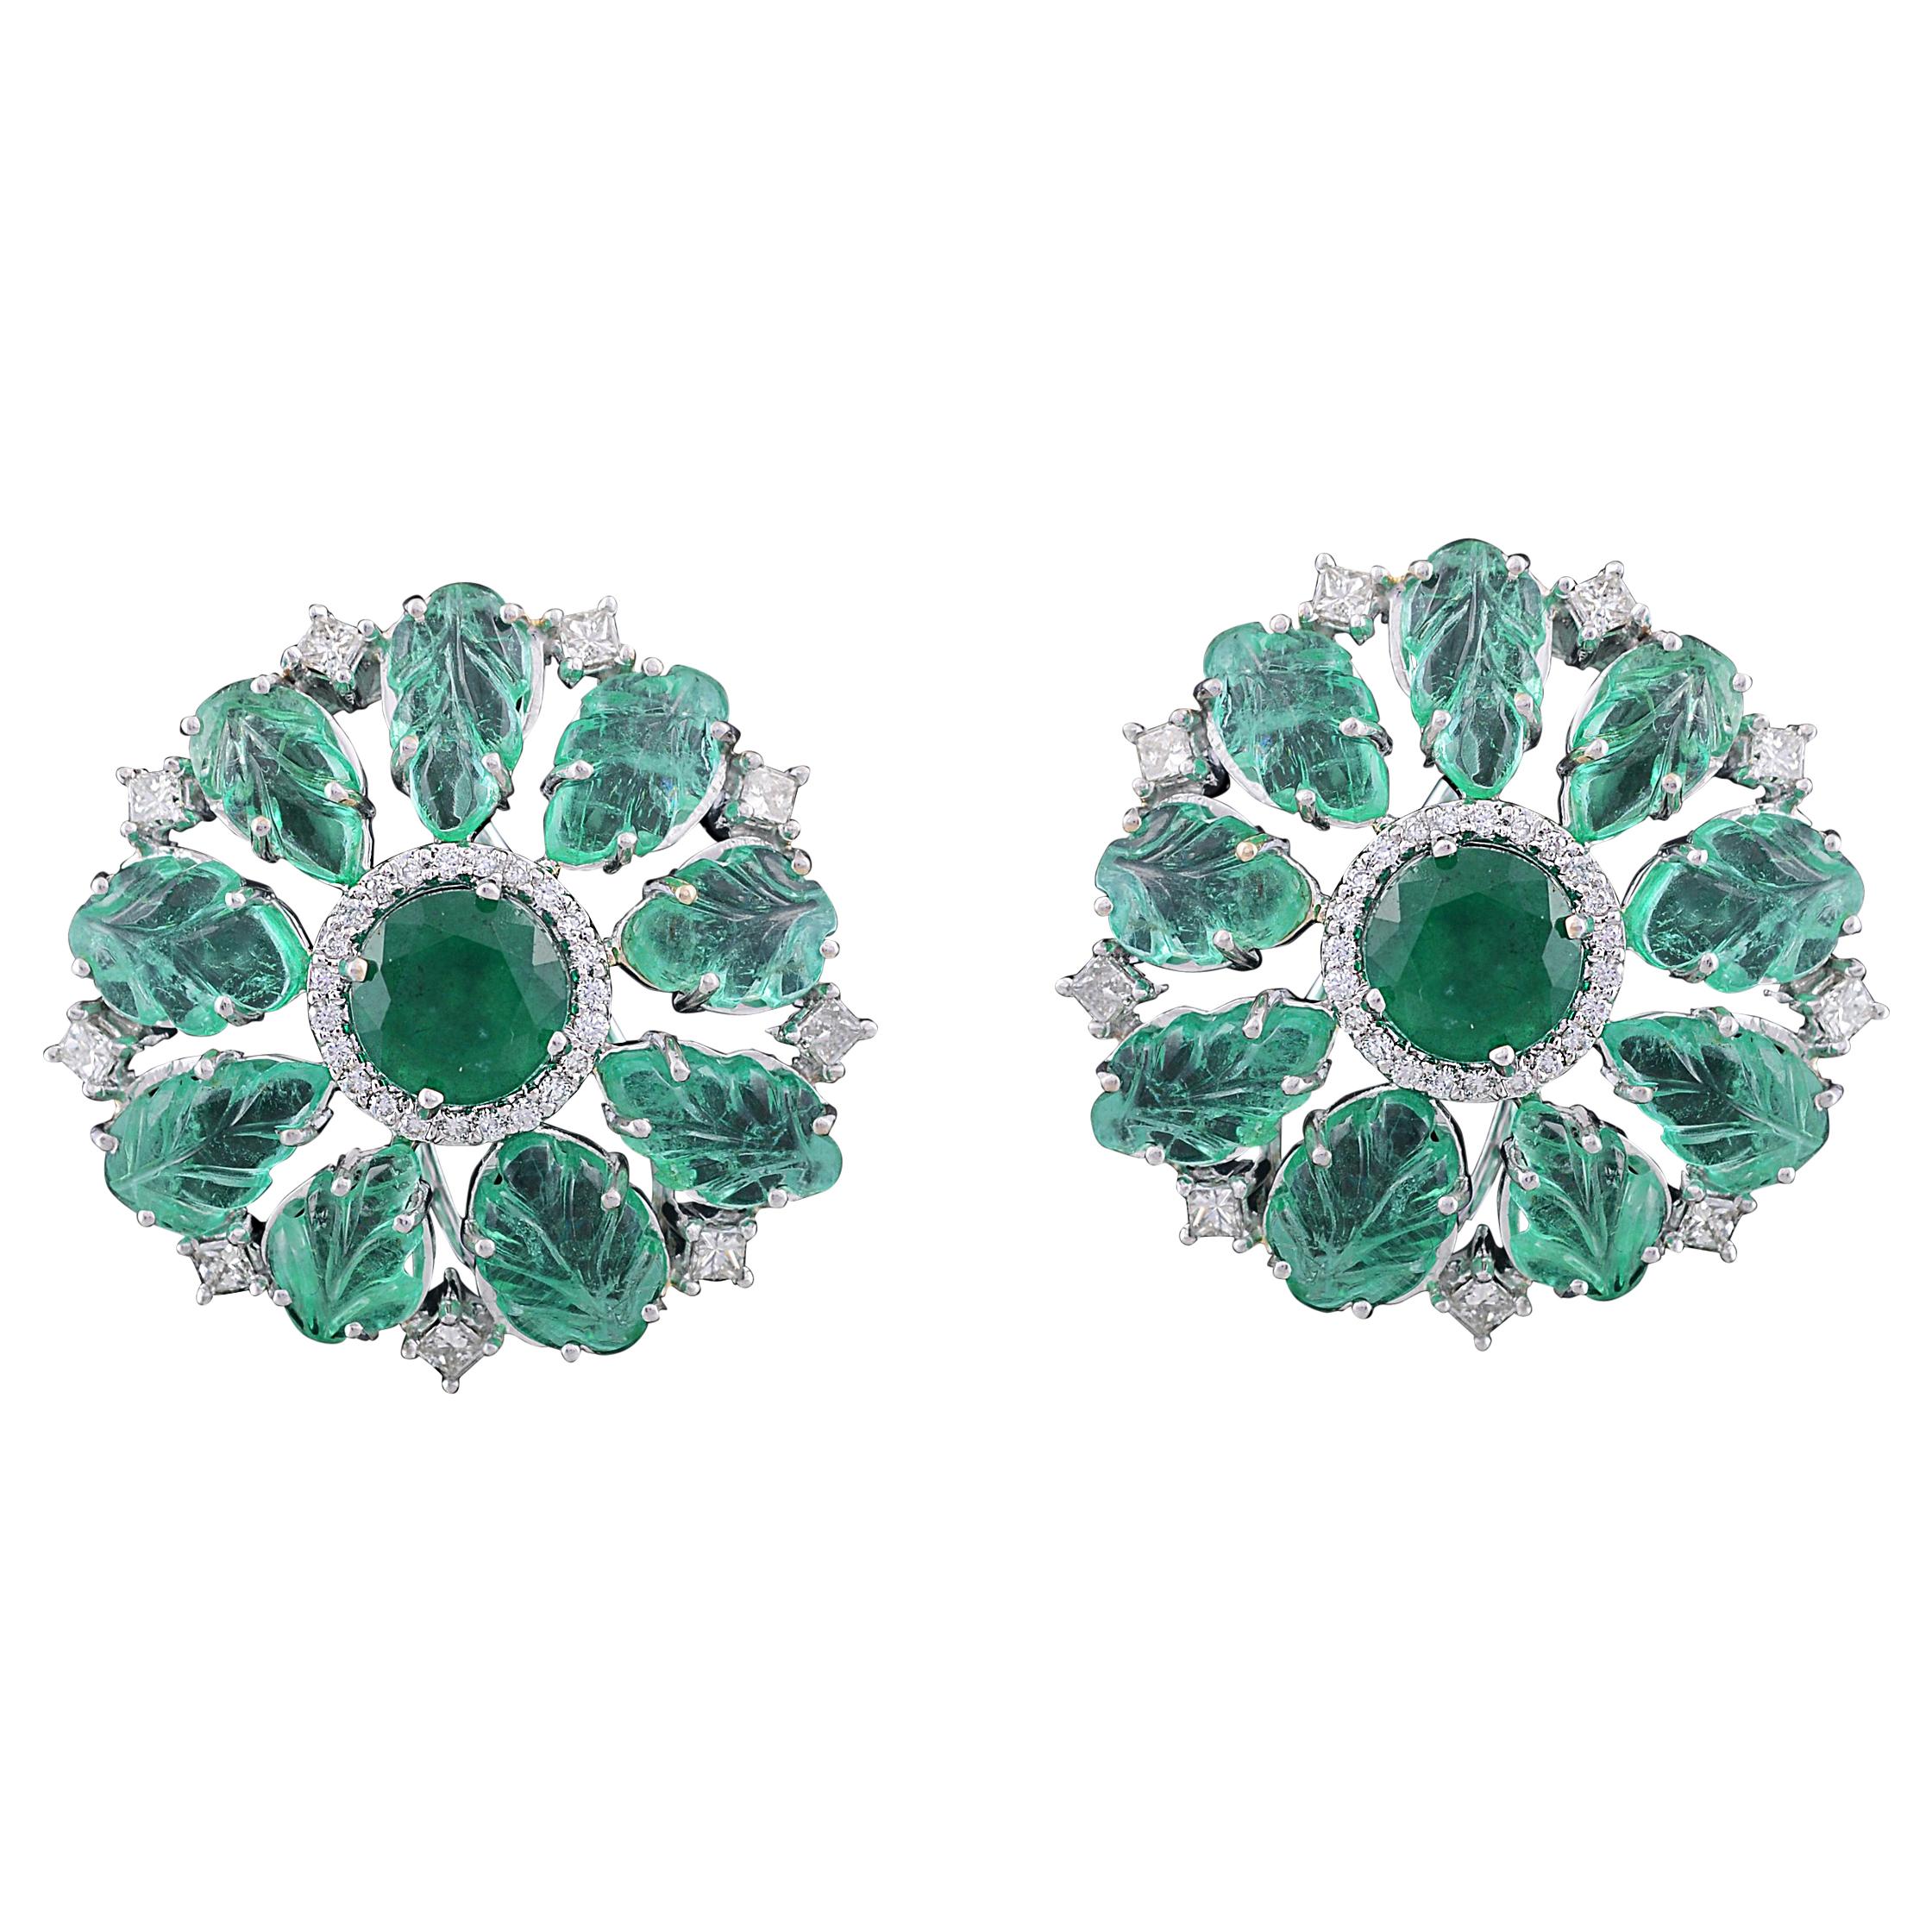 Set in 18 Karat White Gold, Cut and Carved Emerald Stud Earrings with Diamonds